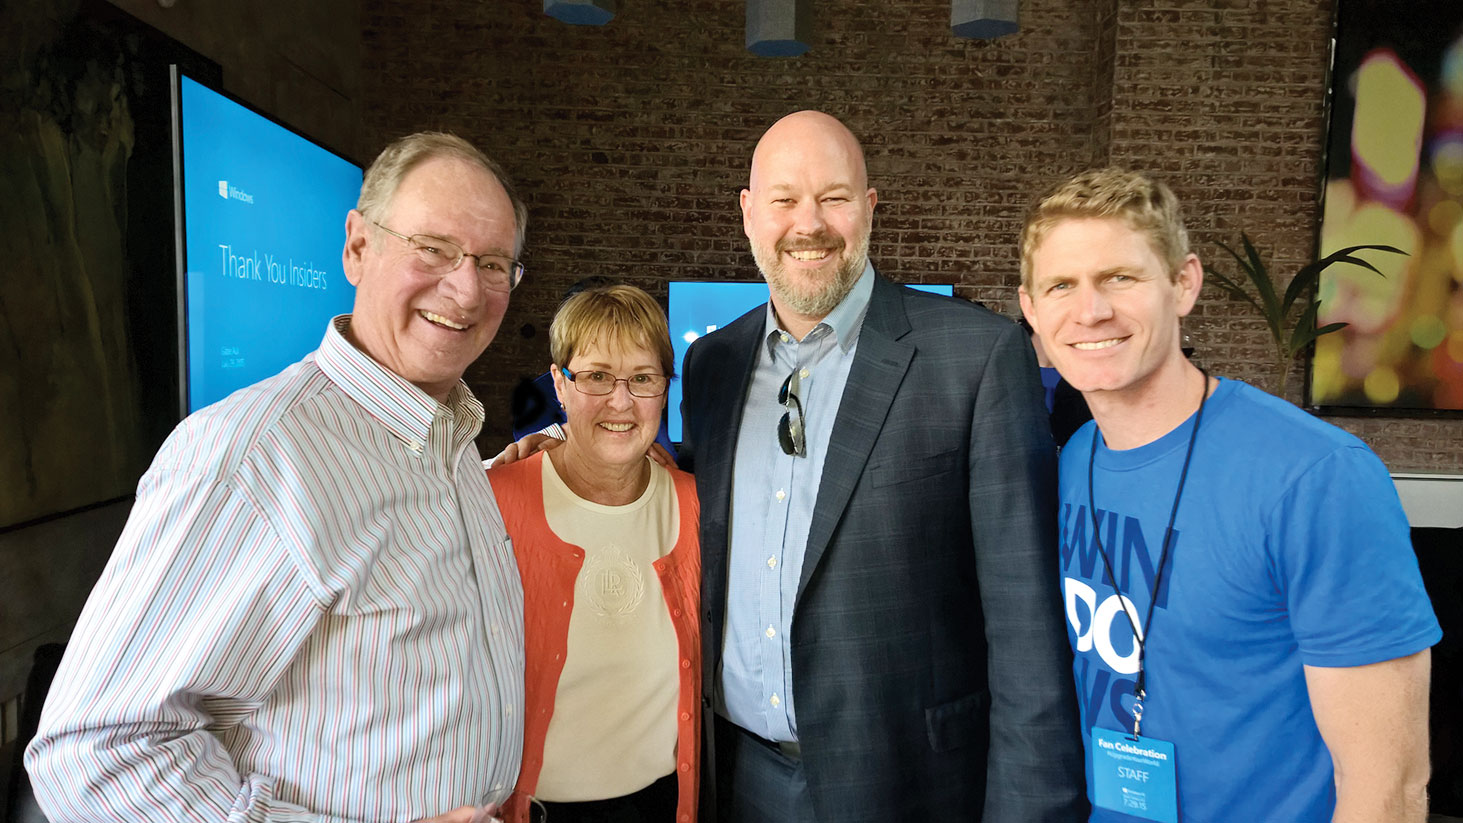 Left to right: Joe and Jenny Rink; G. Aul and J. Marble, Microsoft Windows leaders